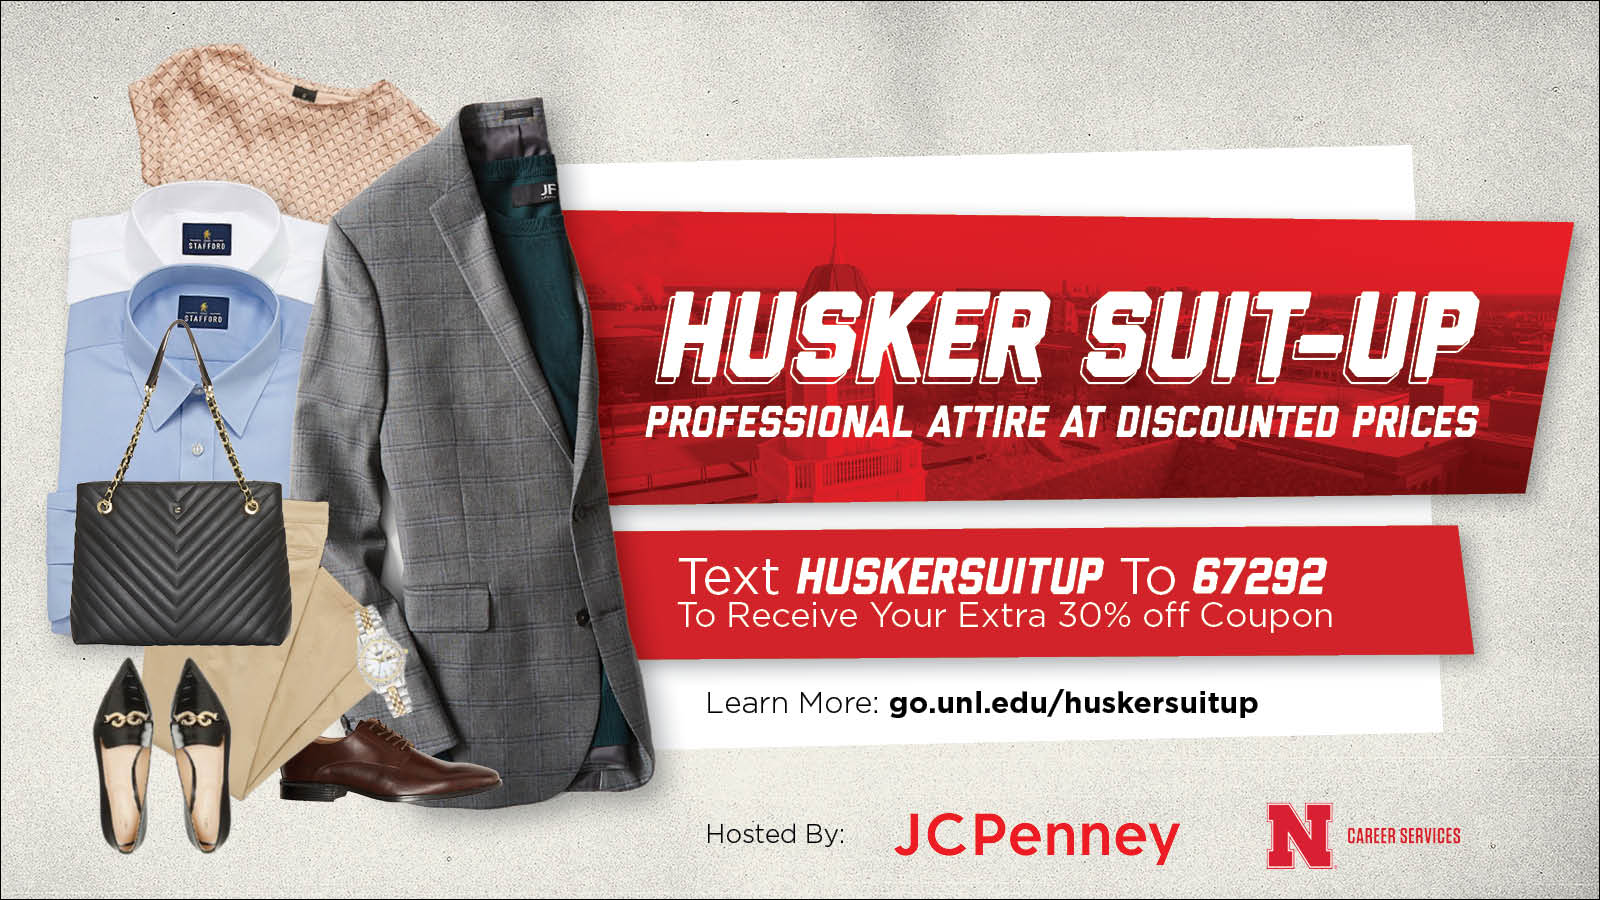 The Husker Suit-Up event, hosted by JCPenney and UNL Career Services, allows students the opportunity to build their professional wardrobe with discounts on career and dress apparel.